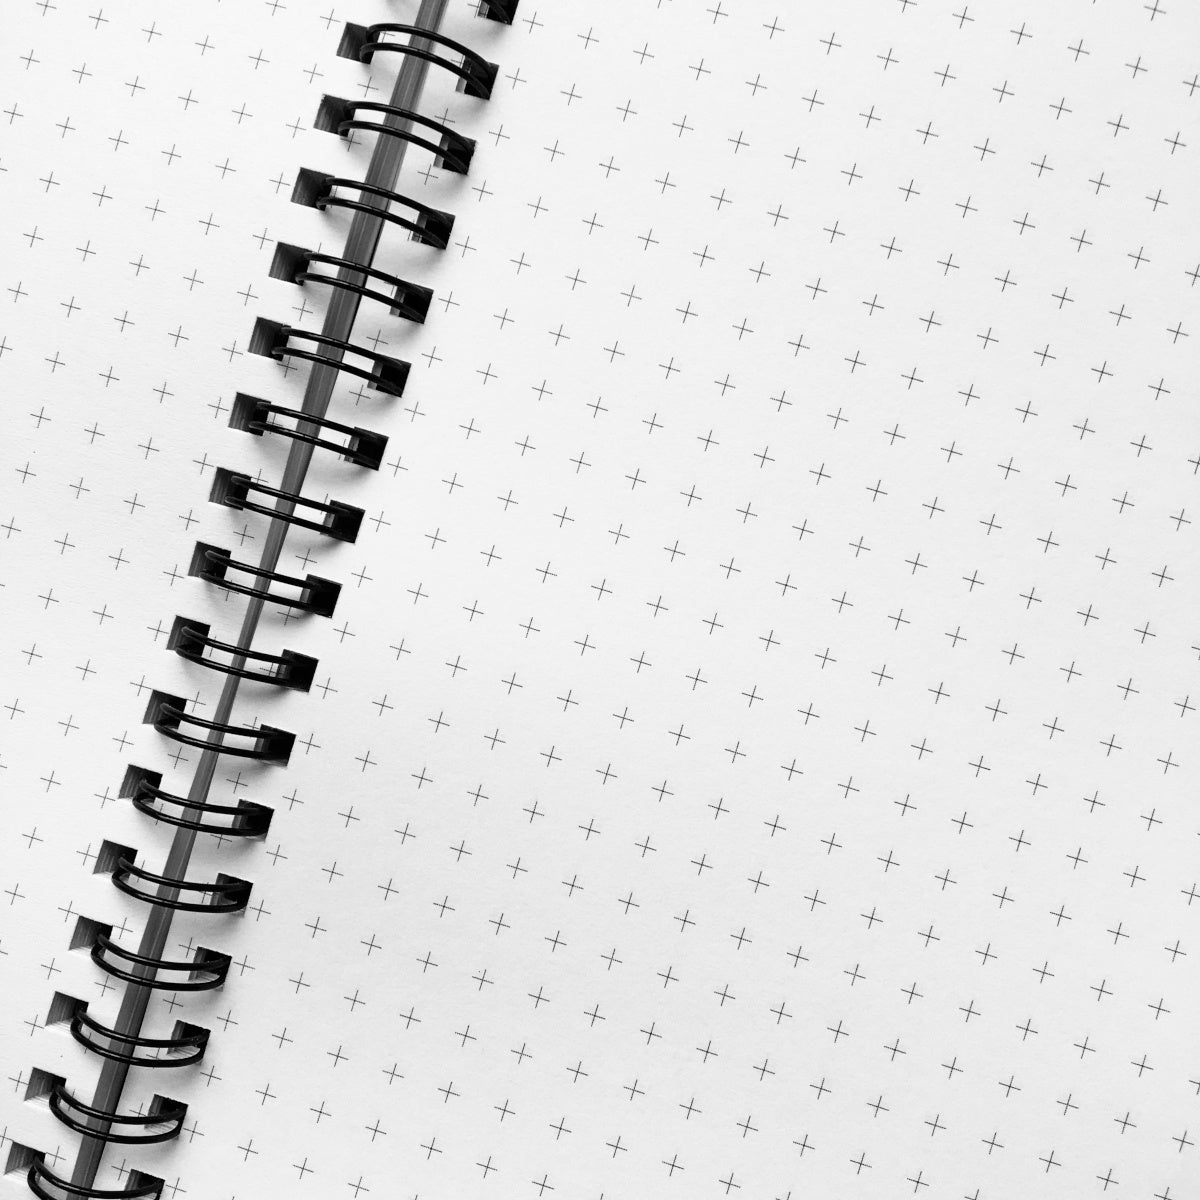 A close up of a spiral notebook open flat, showing grid graph pages (little intersection crosses). The metal spiral rings are black.